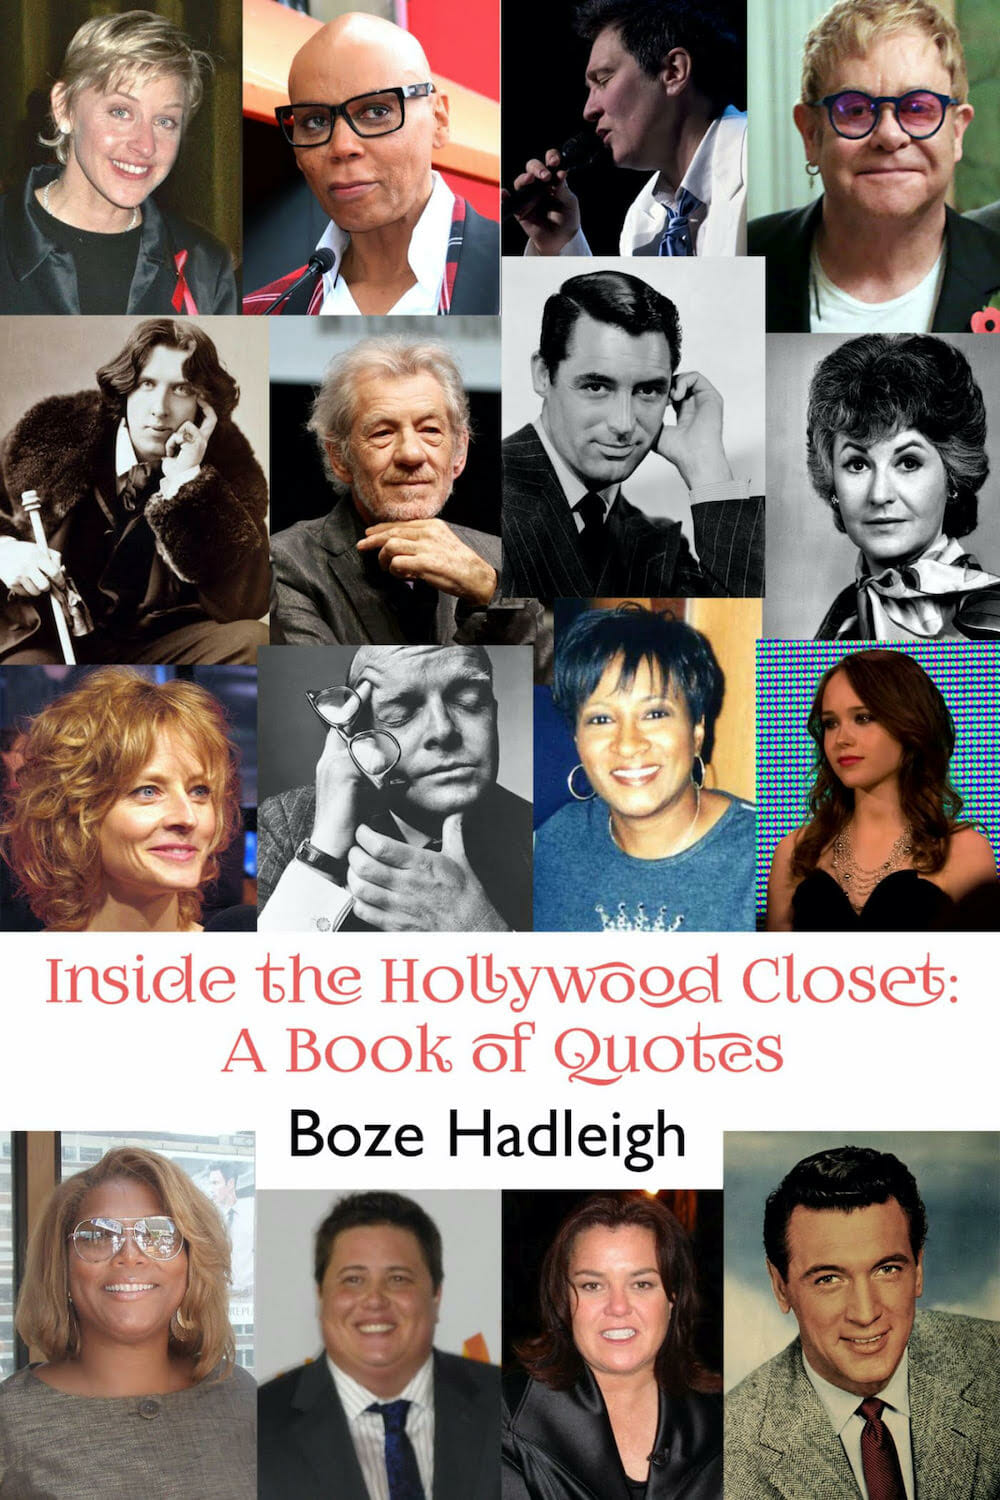 INSIDE THE HOLLYWOOD CLOSET: A BOOK OF QUOTES